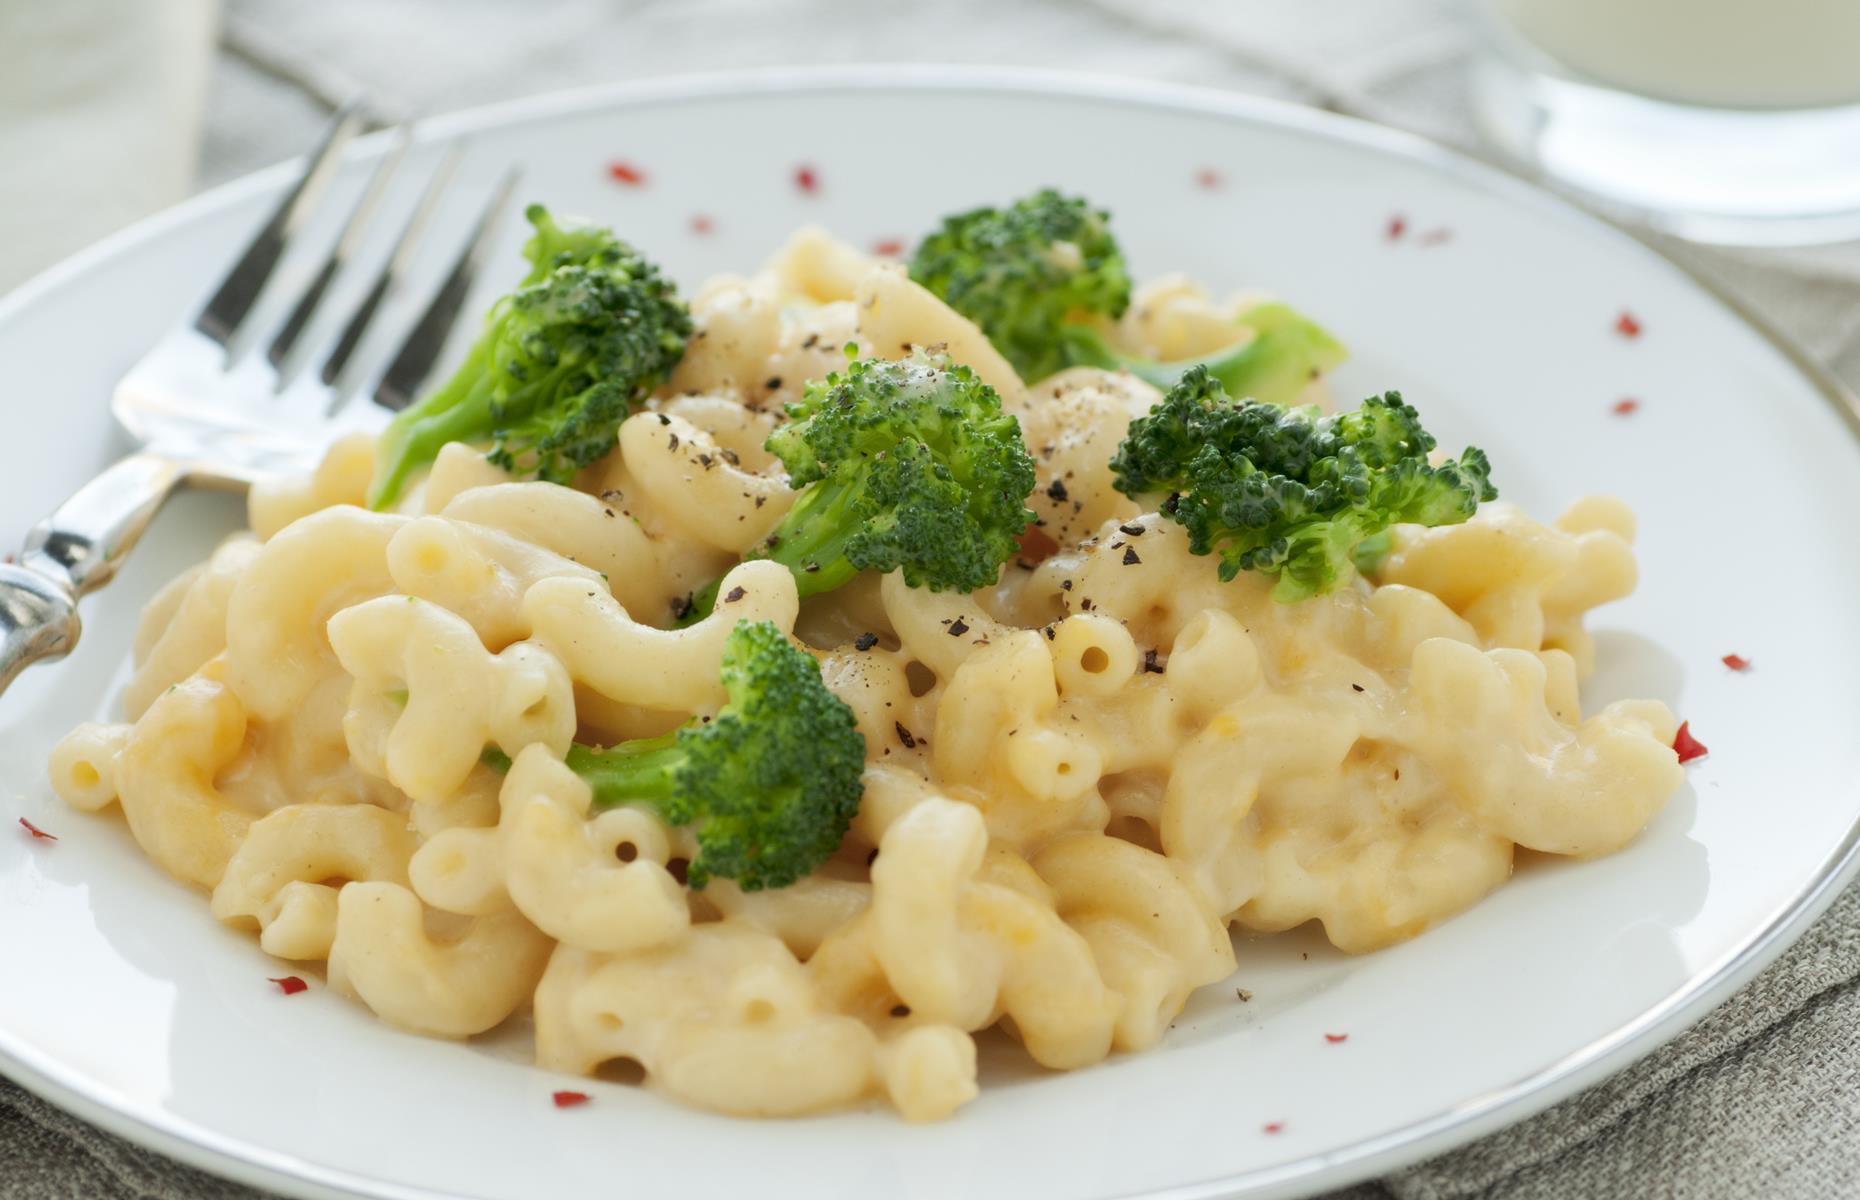 Alternatively, to lighten up a heavy dish, use skimmed milk when making the béchamel and limit the cheese. Cooked broccoli, spinach or red pepper will also pad out the dish, so you eat less pasta and more veg.